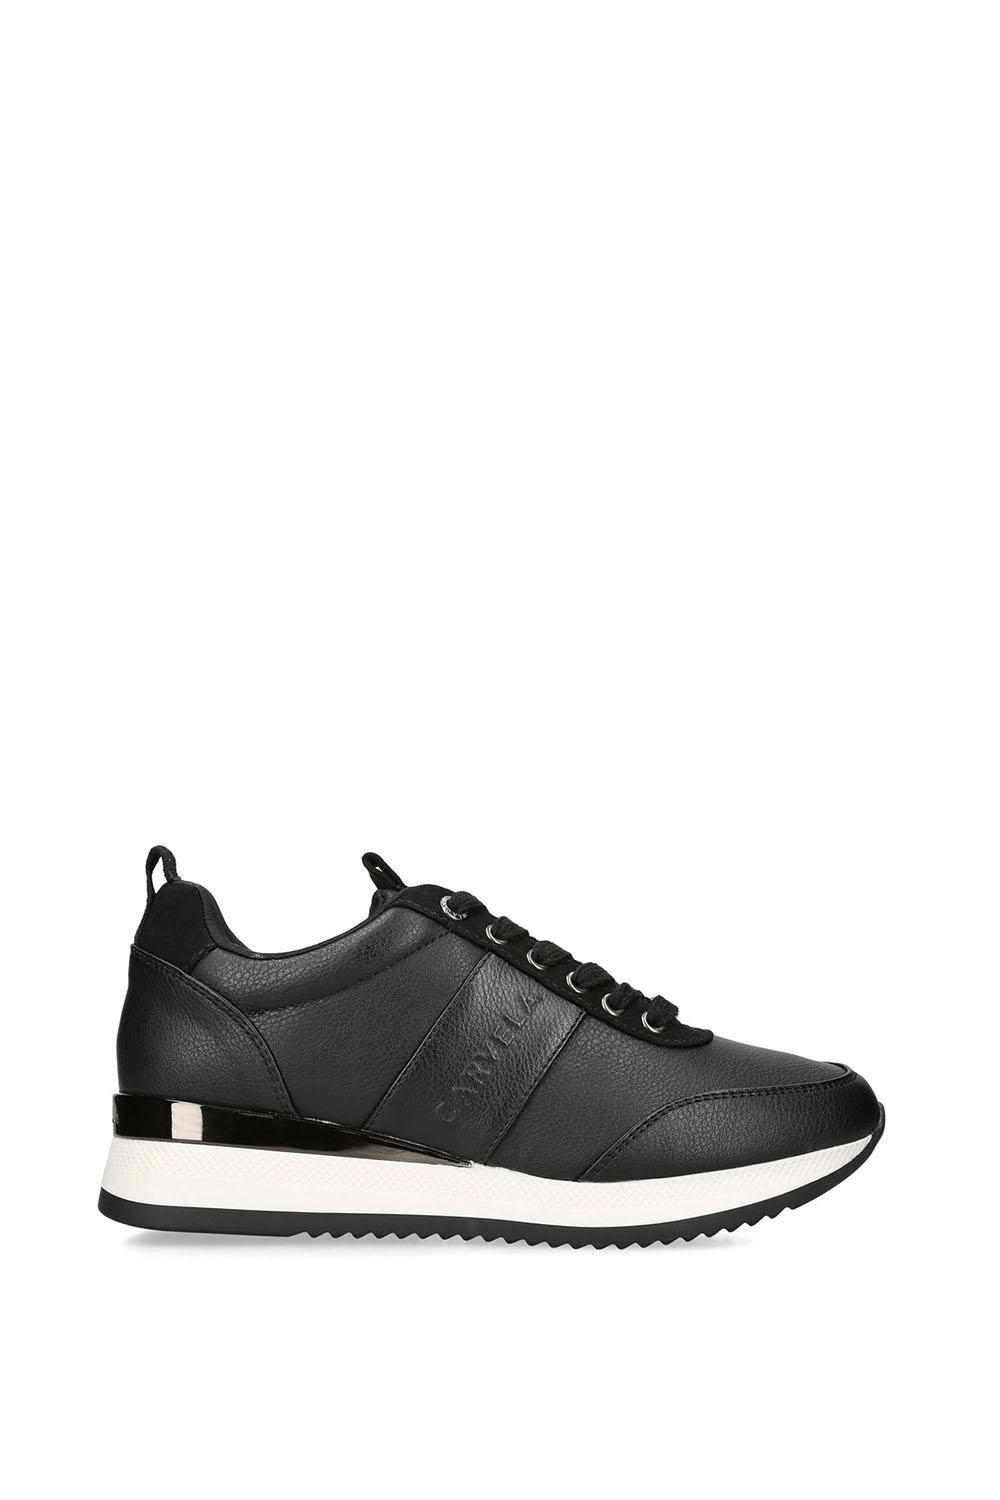 Кроссовки 'Frame Runner' Trainers Carvela, черный кроссовки frame runner trainers carvela черный